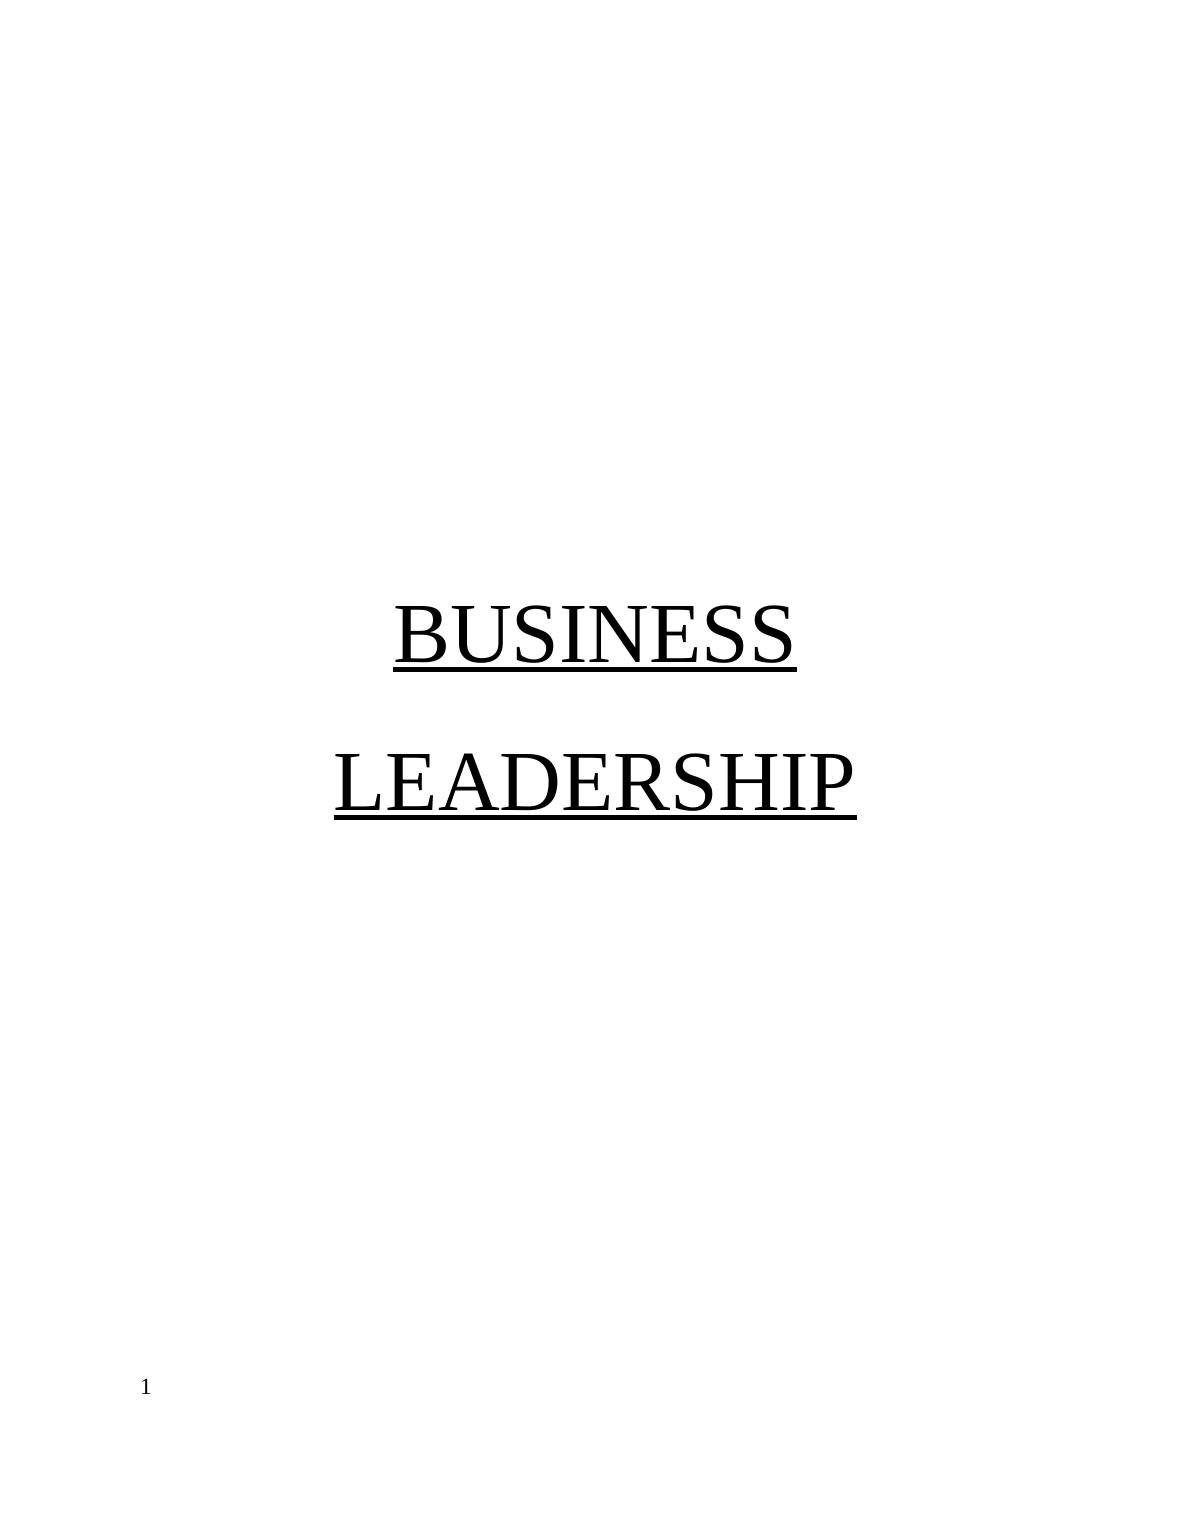 Reflection Essay on Business Leadership_1